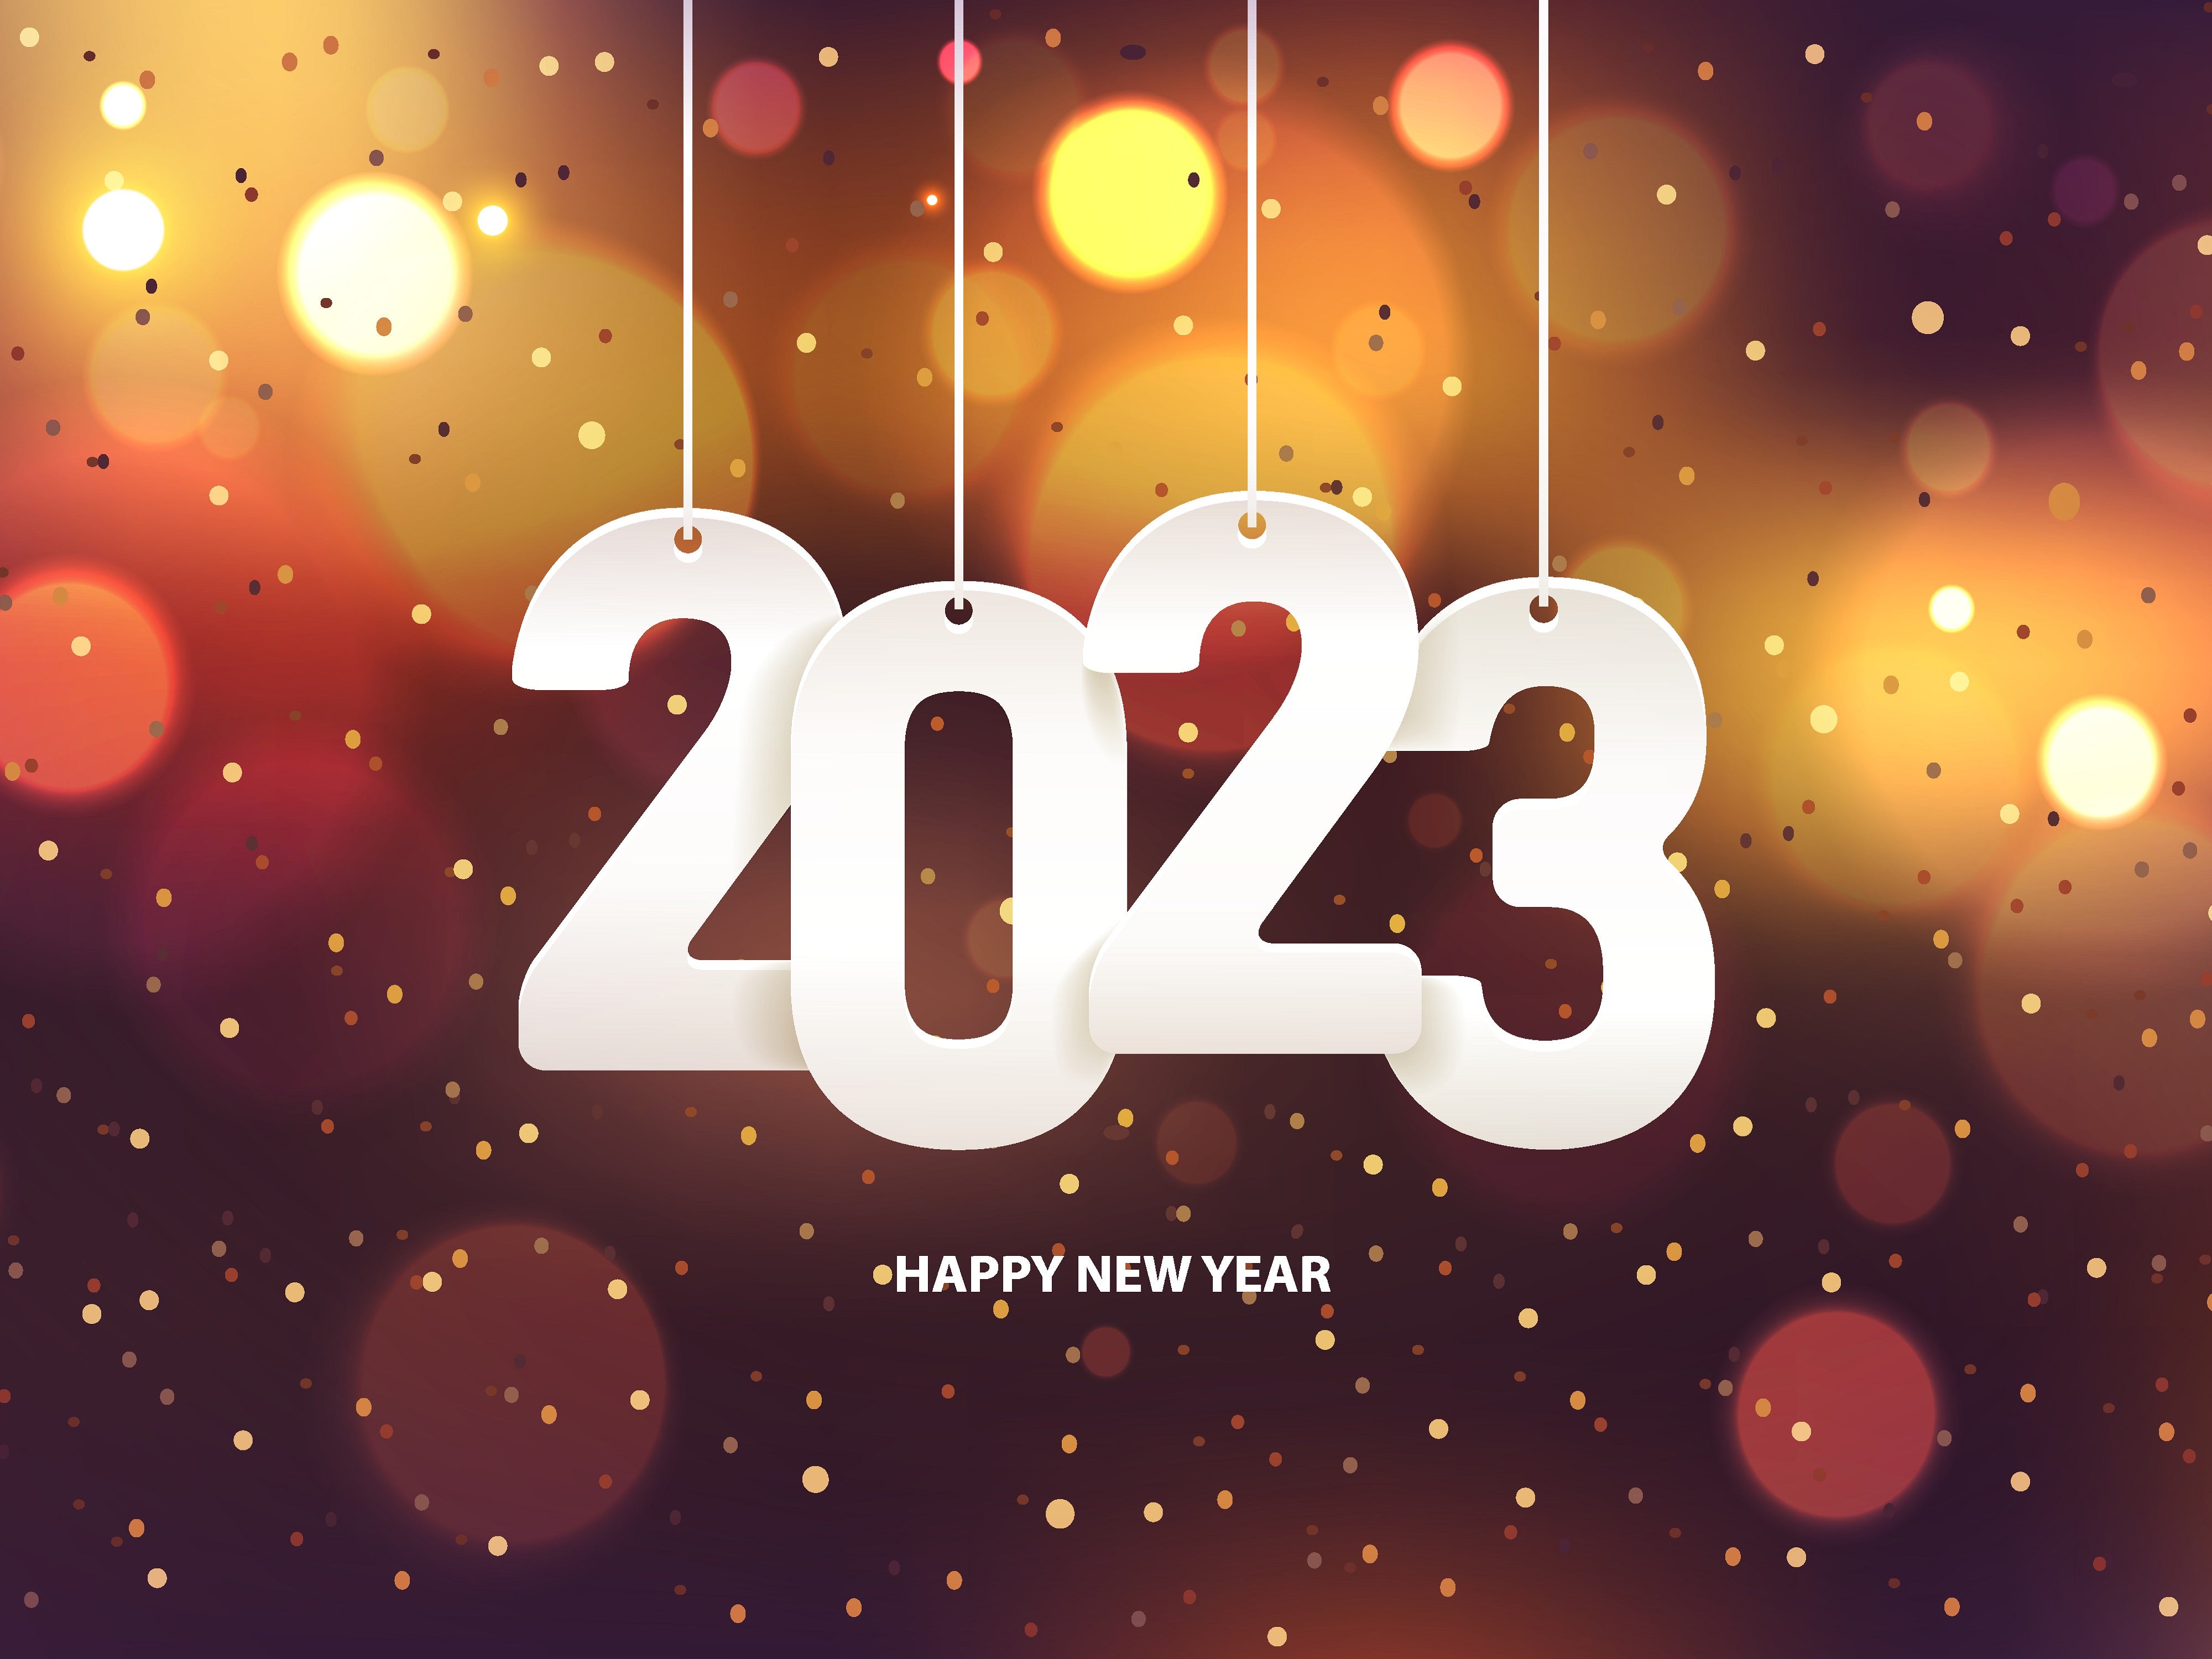 The best New Year greetings for WhatsApp 2023